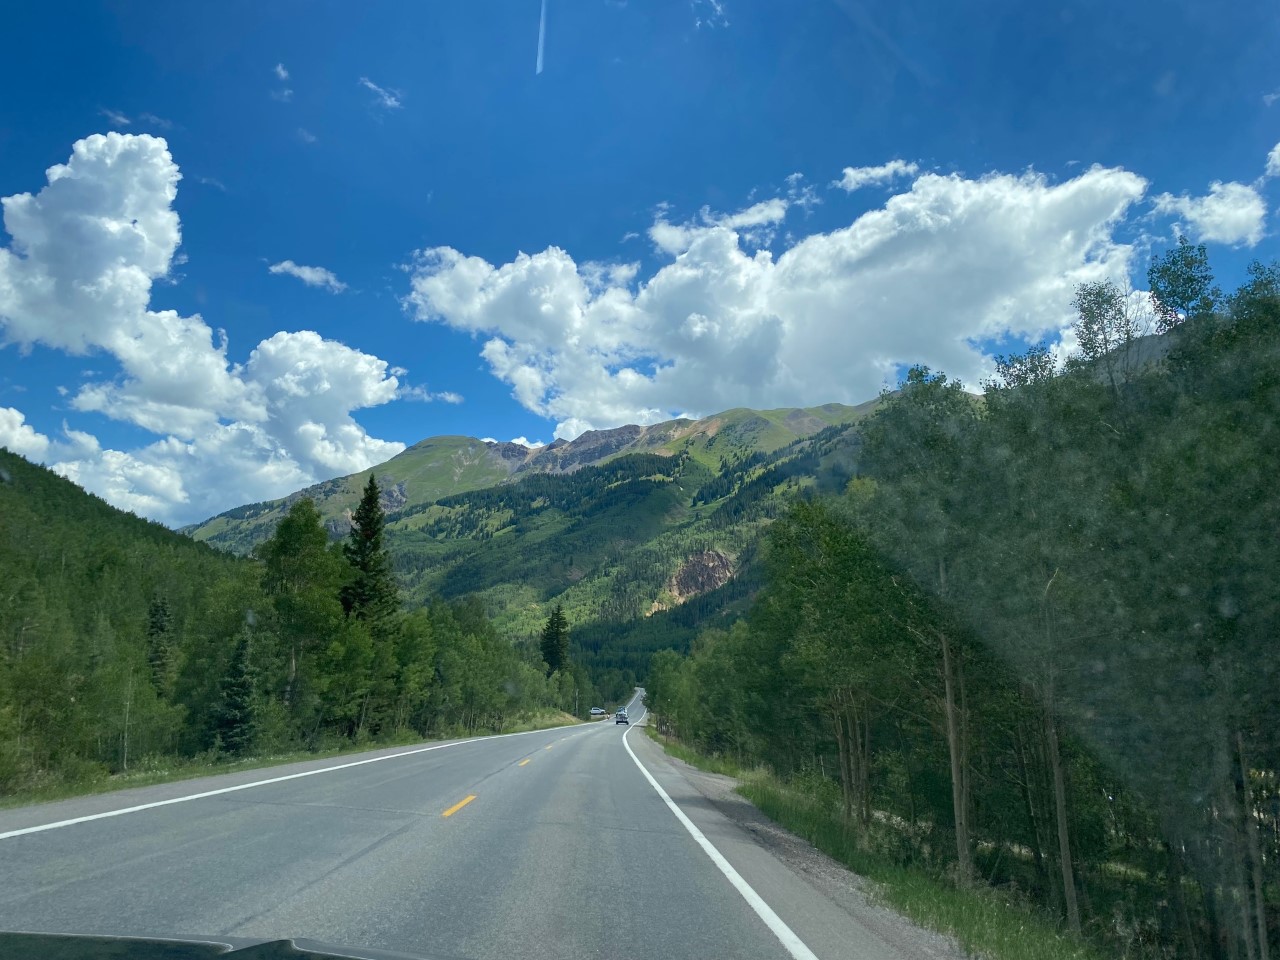 The Million Dollar Highway cuts through some scenic mountains as it descends and ascends to Ouray.